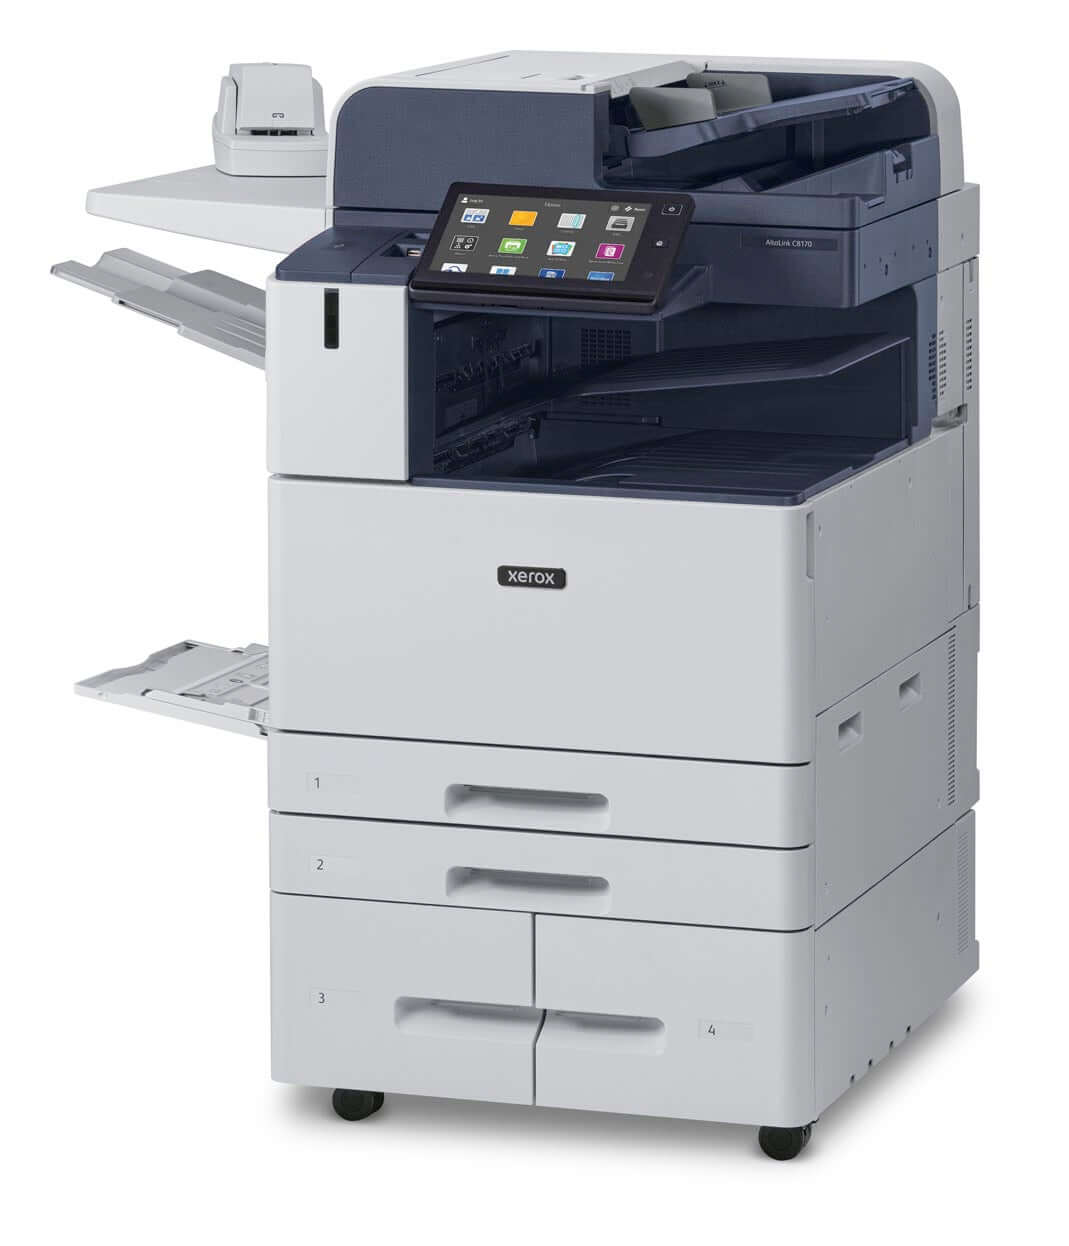 Xerox AltaLink C8135 A3 Colour Multi-Function Printer - 3,140 Paper Supply